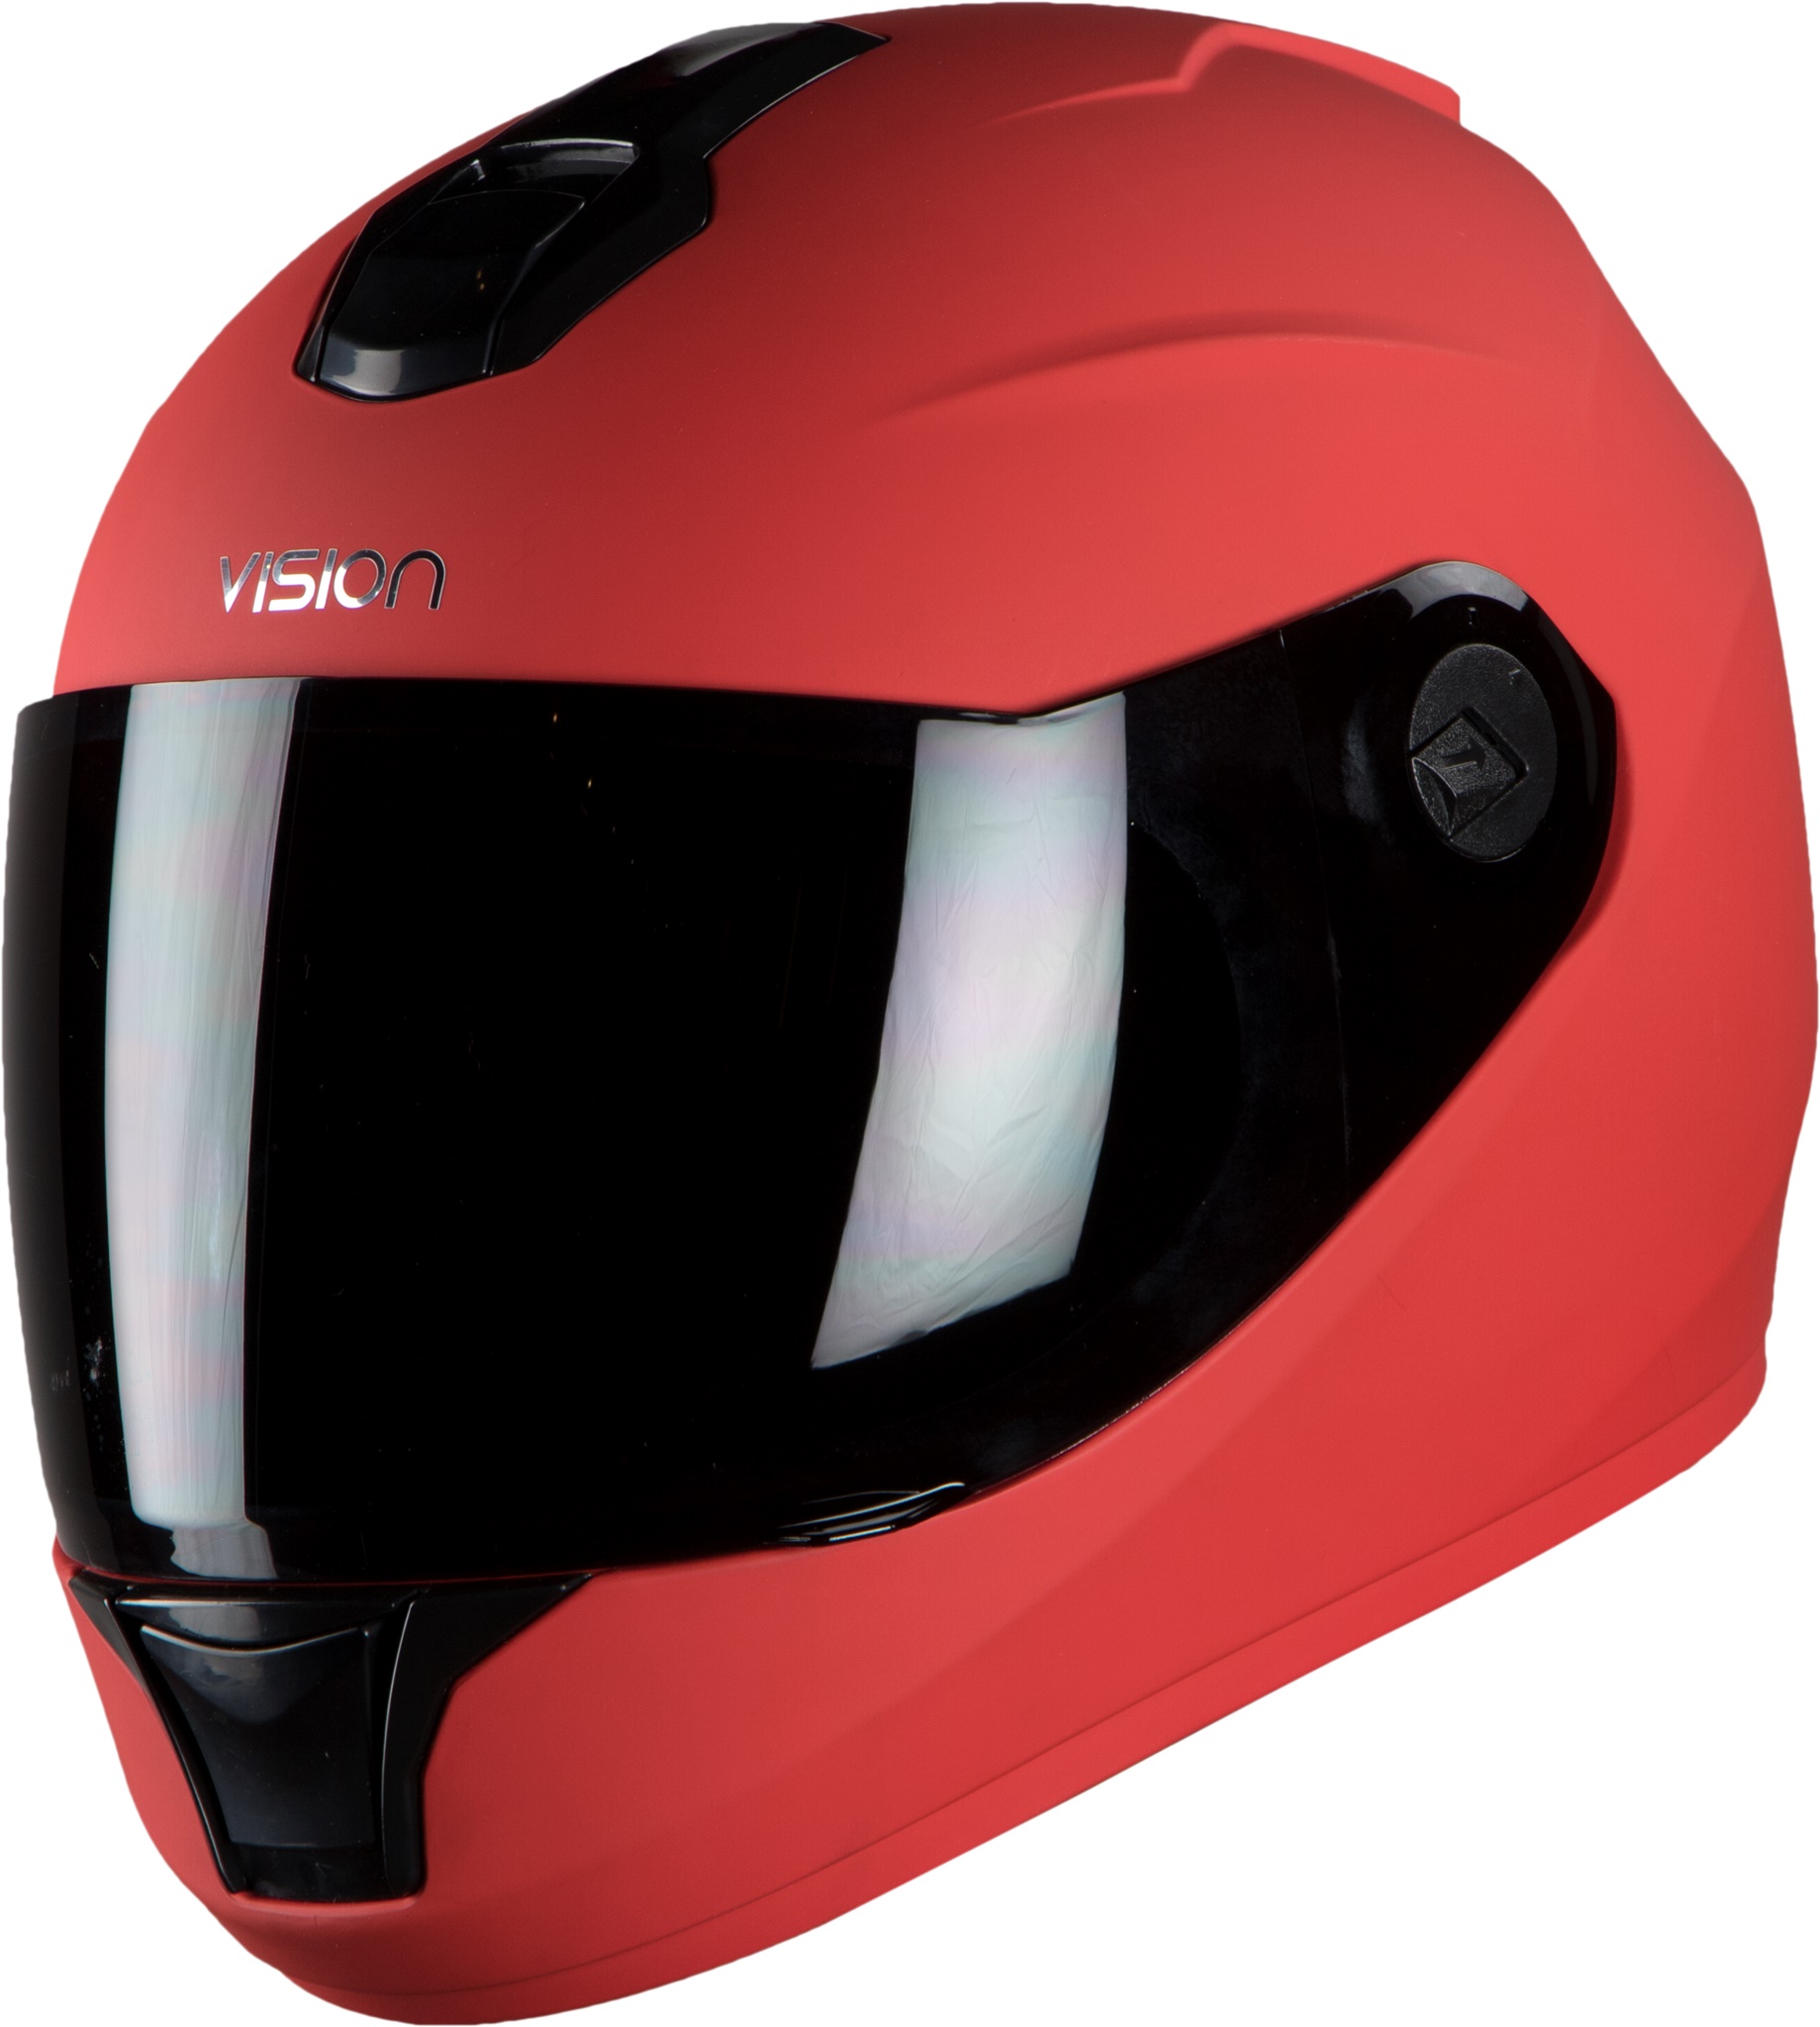 Steelbird Men HI-GN Vision Painted Matt Sports Red ( Fitted With Clear Visor Extra Smoke Visor Free)re